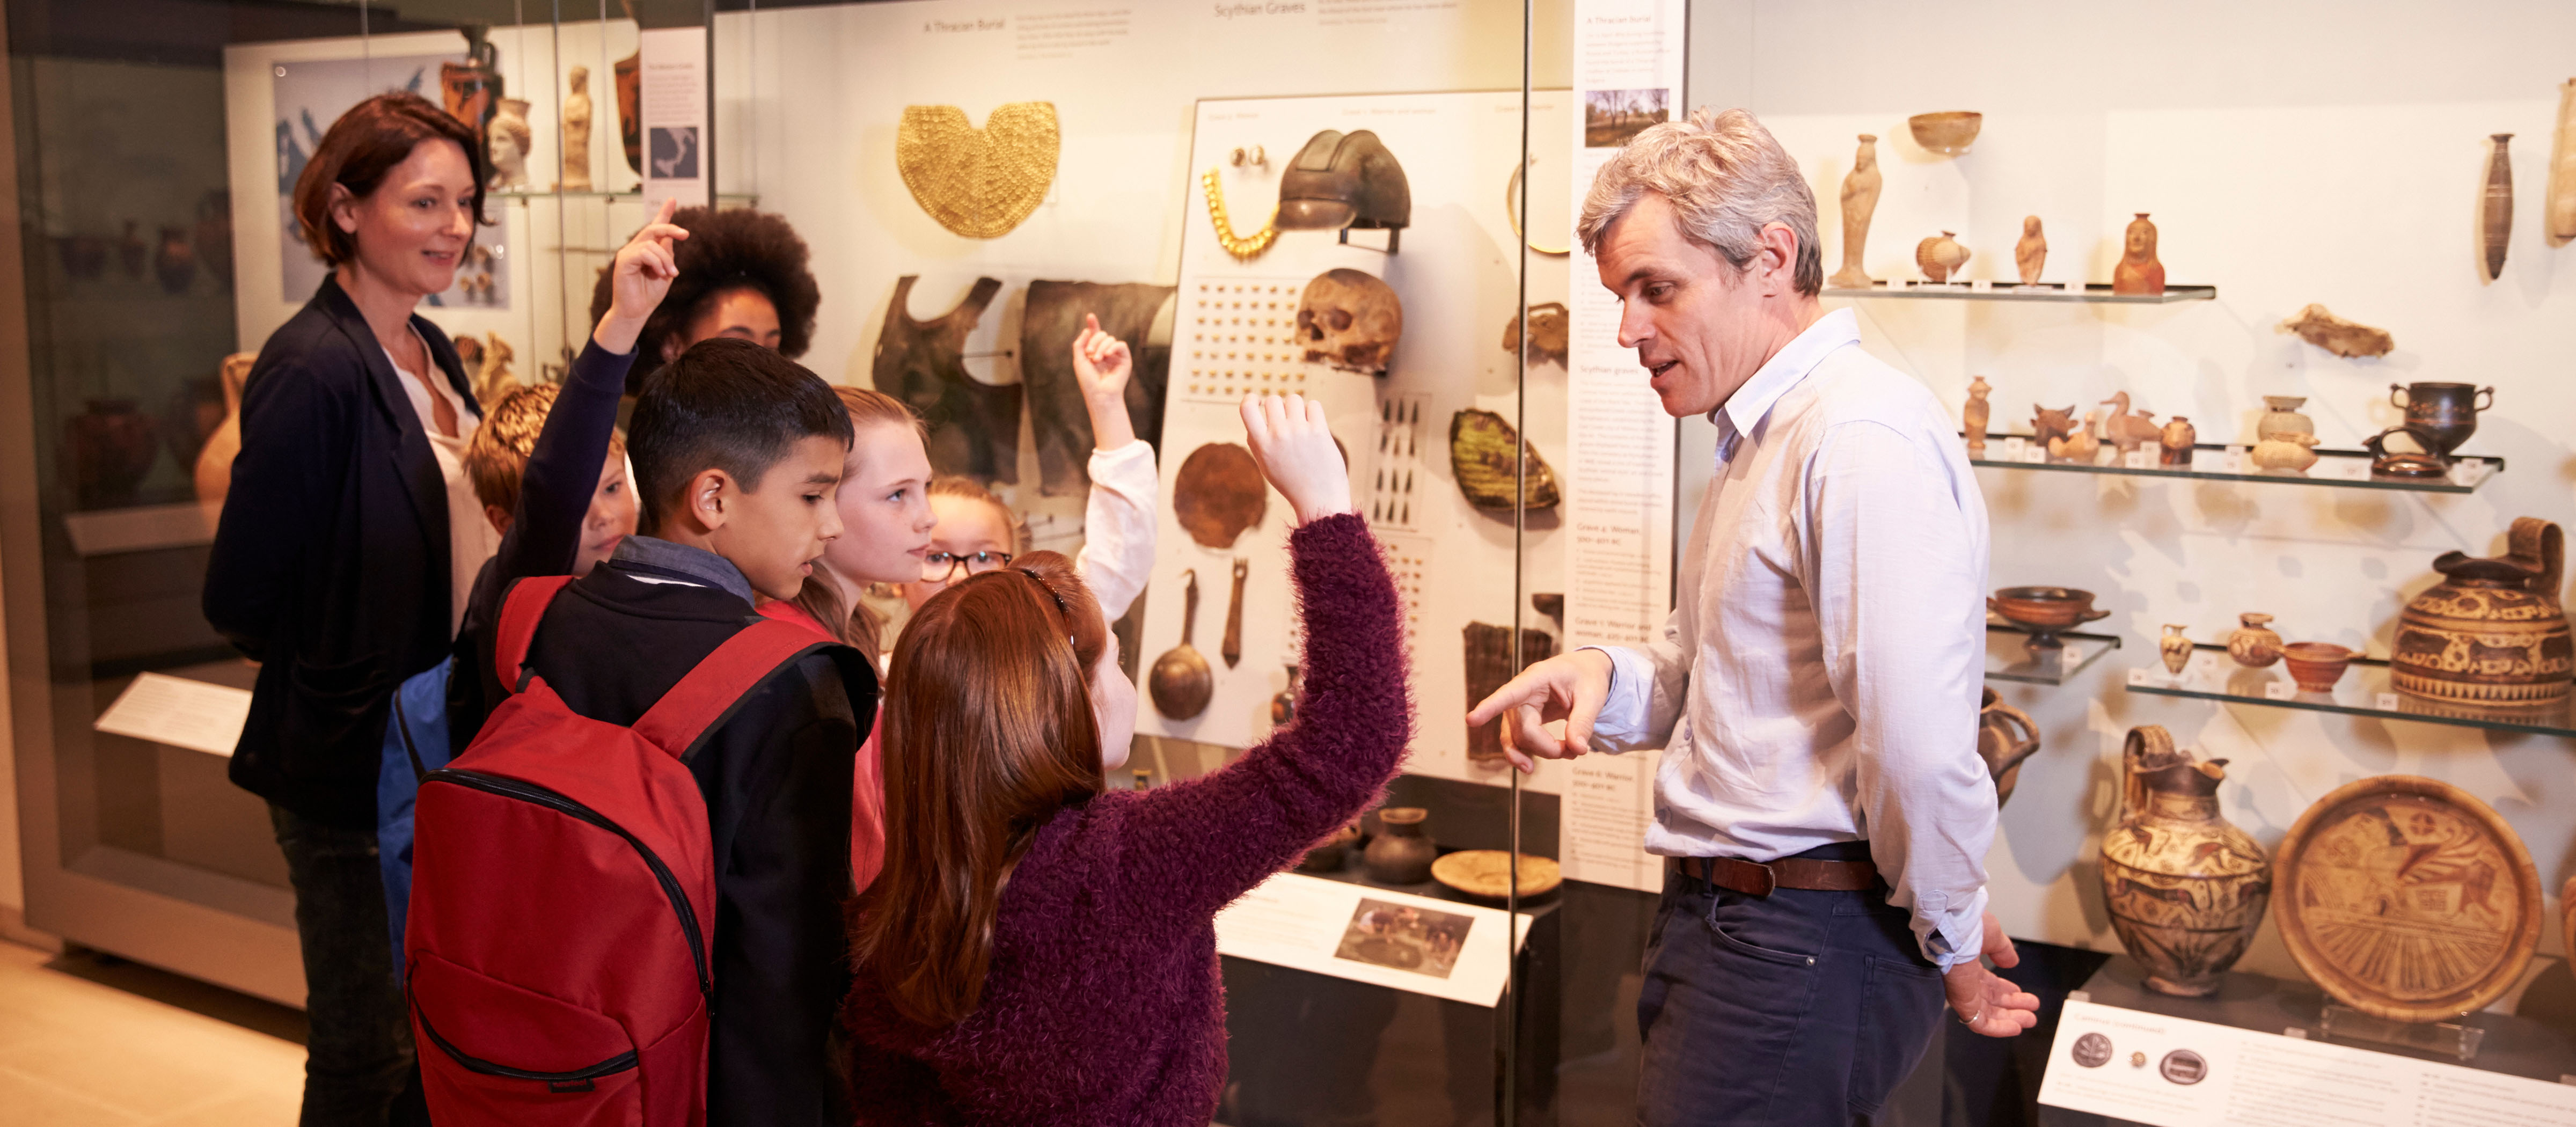 Historian explaining exhibit and artifacts to students at a museum